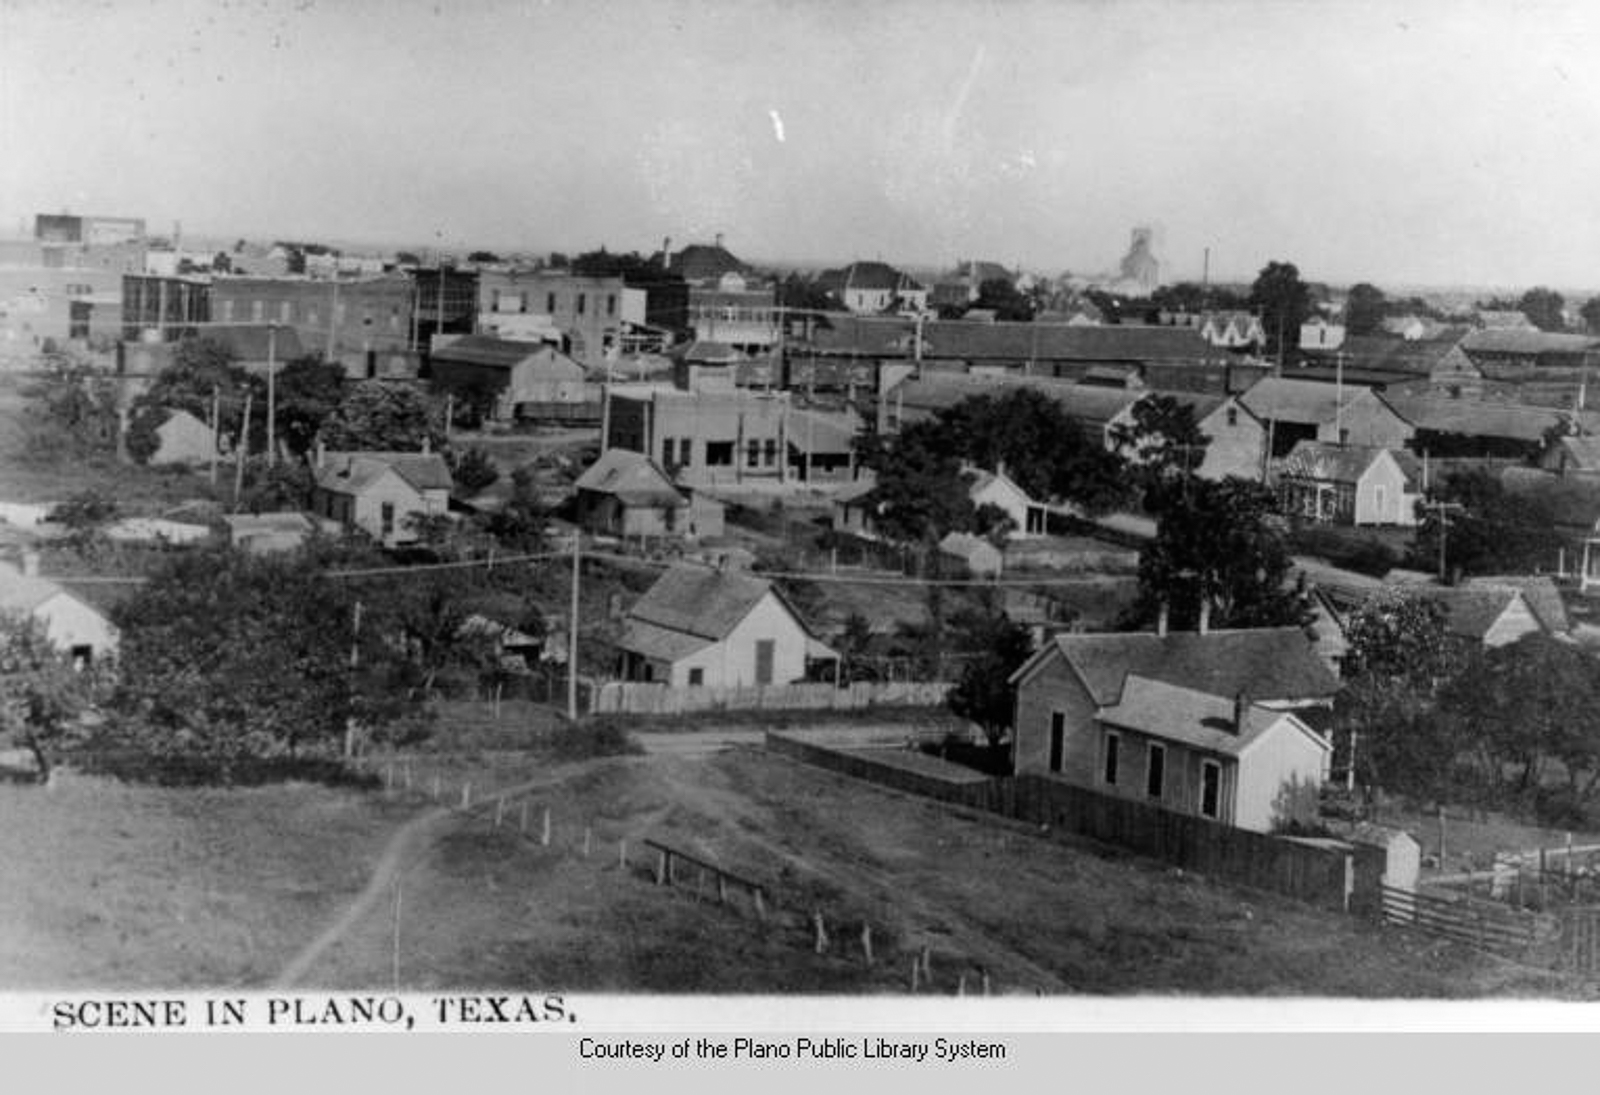 Photos provided by Plano Public Library